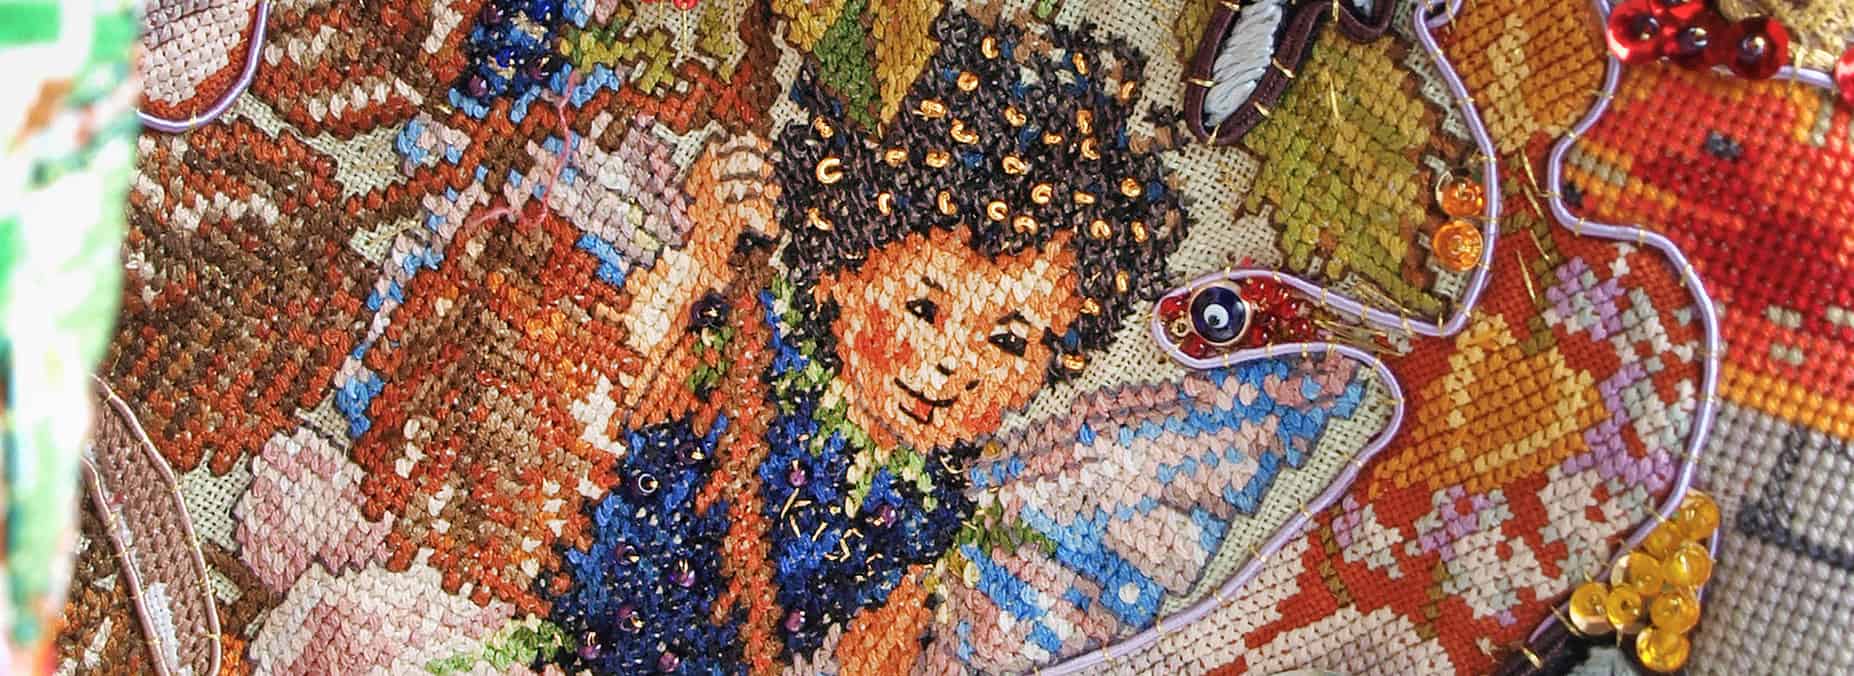 Wereldmuseum Rotterdam closes popular embroidery exhibition with special event